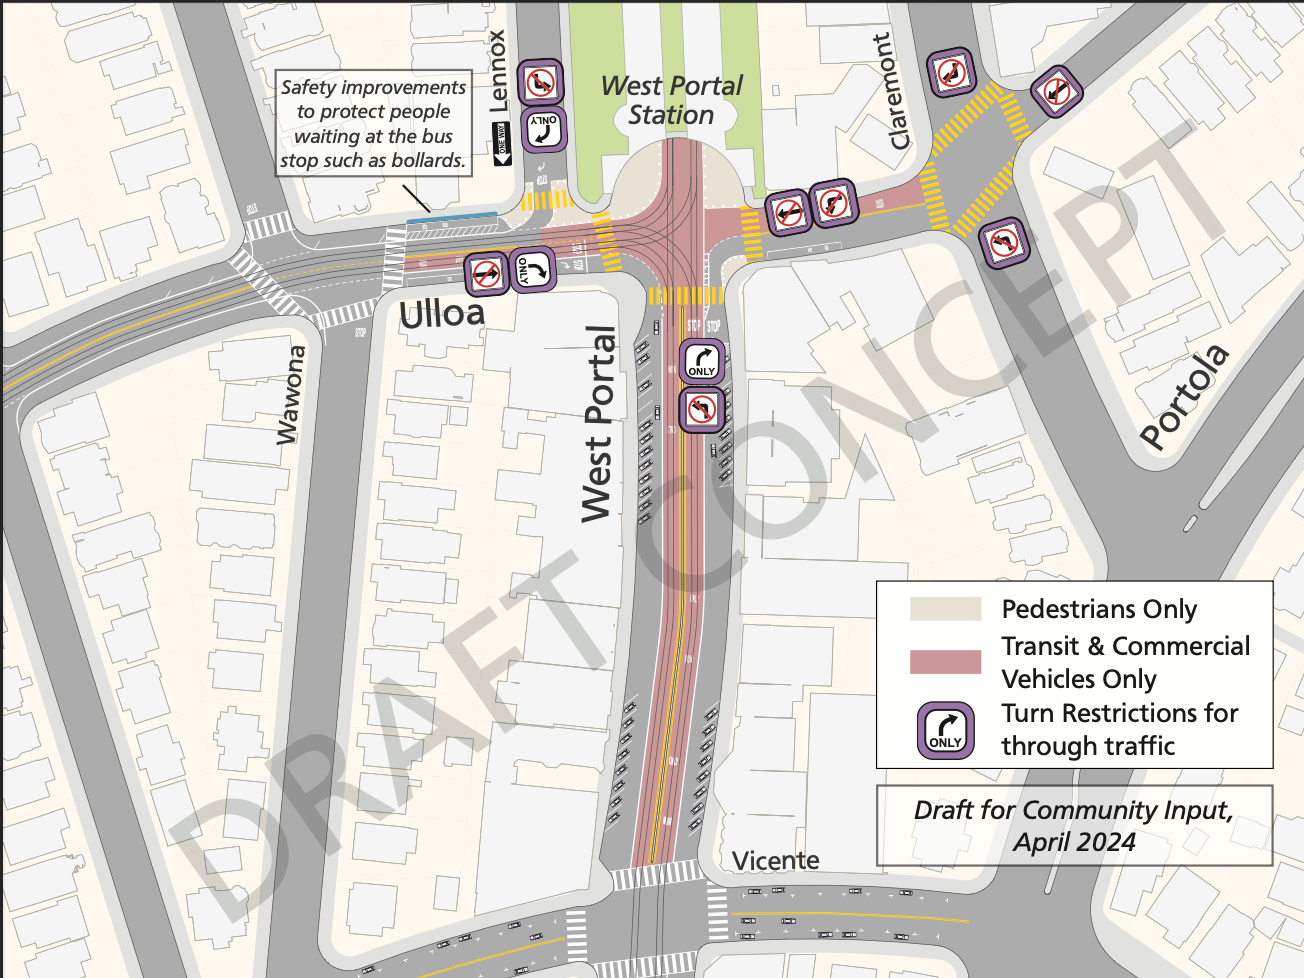 A draft map shows road changes near West Portal Station, with areas for buses, pedestrians, and turn restrictions.